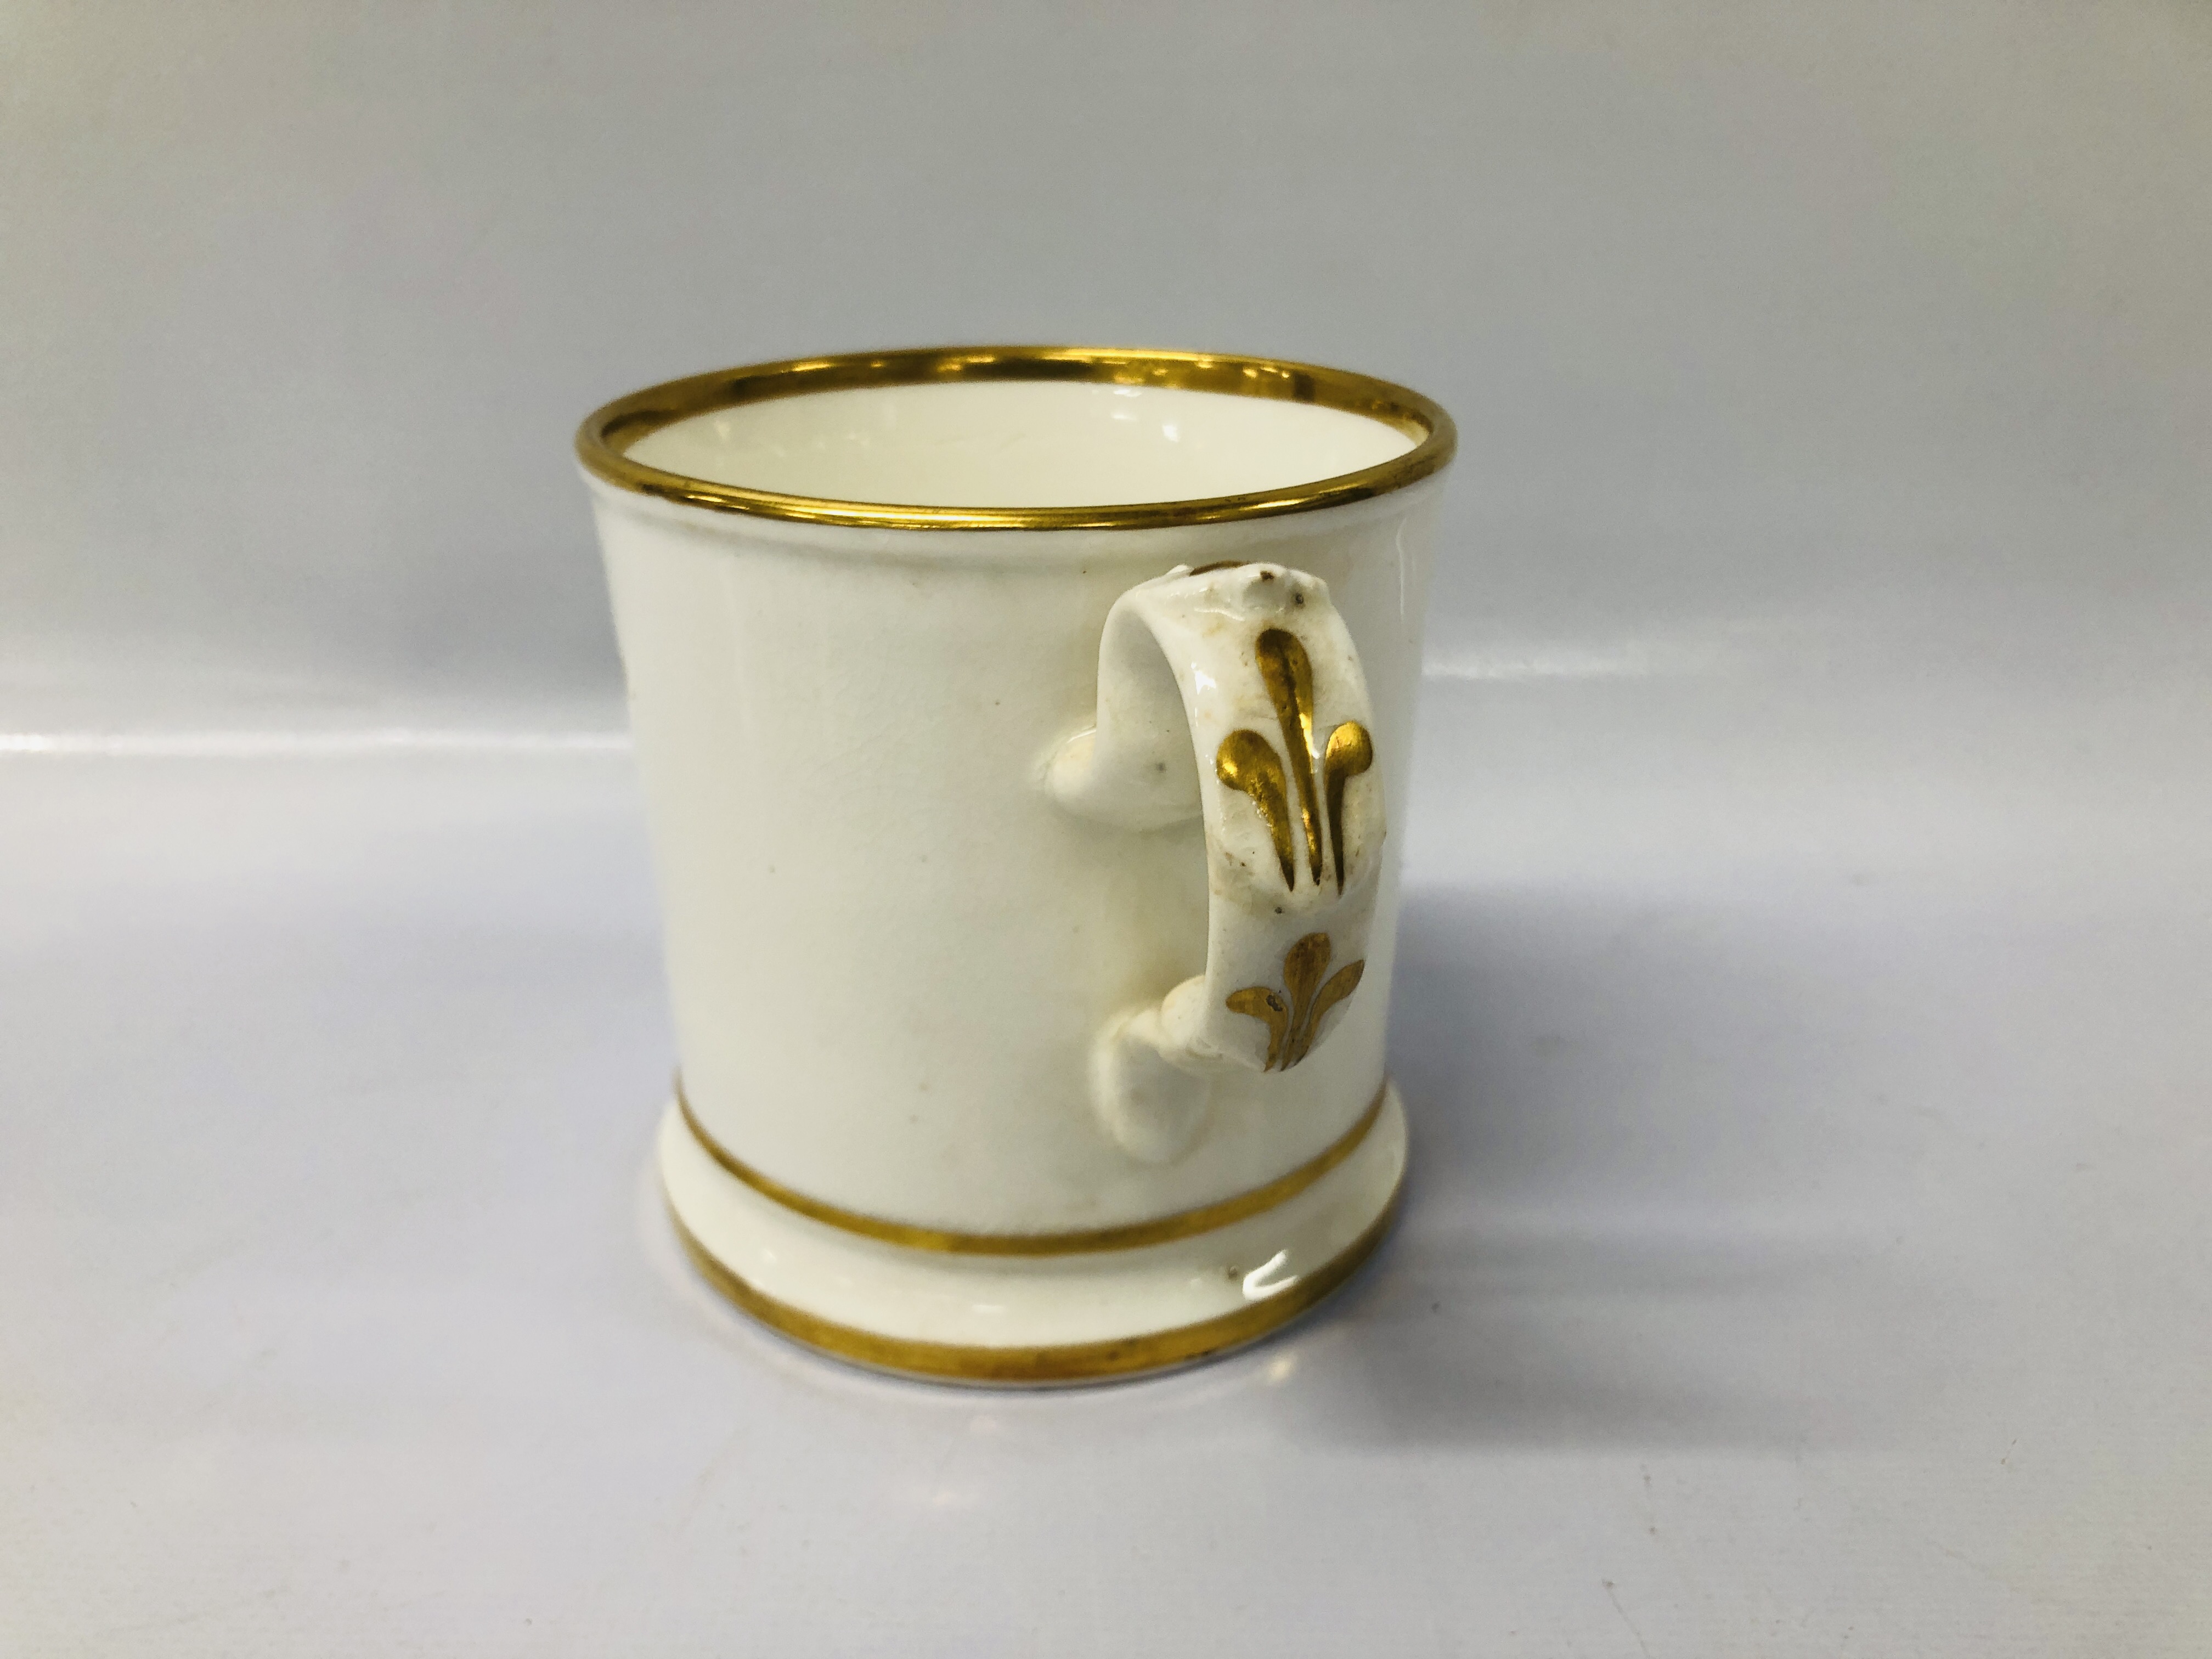 VINTAGE "DAVENPORT" MUG HANDPAINTED WITH FLOEWRS AND LAKE SCENE ALONG WITH A CREAM WARE CHRISTENING - Image 9 of 9